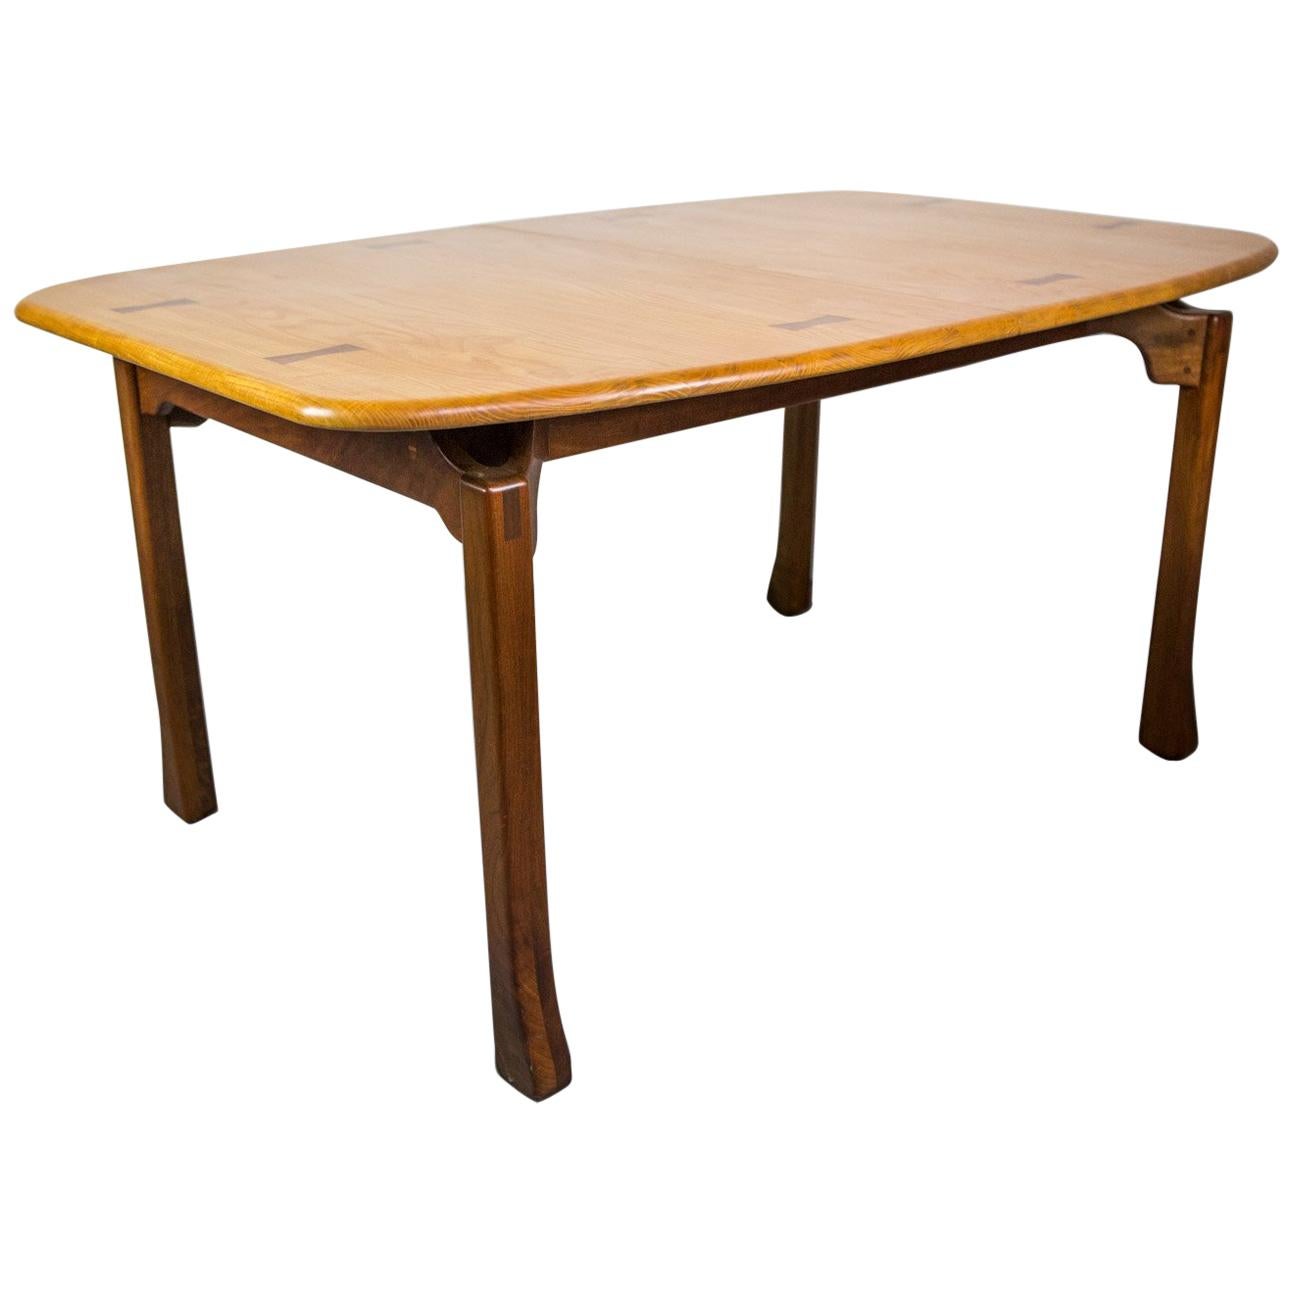 Woodworking Studio Dining Table by Ejner Pagh